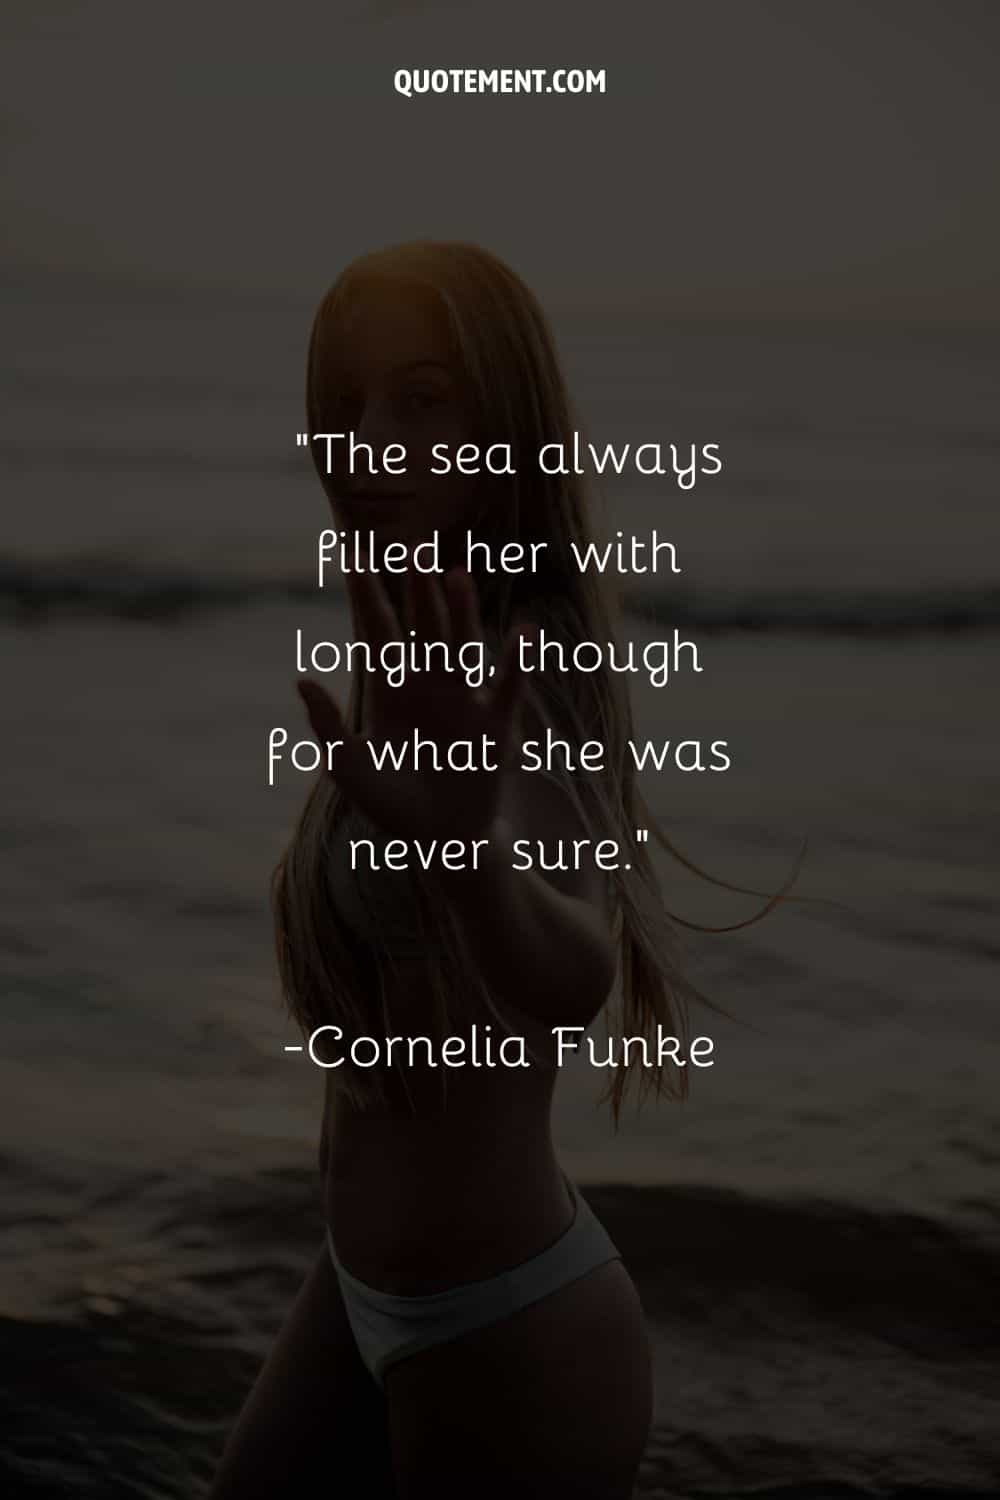 Girl with long hair standing in the water representing a quote about the sea.
